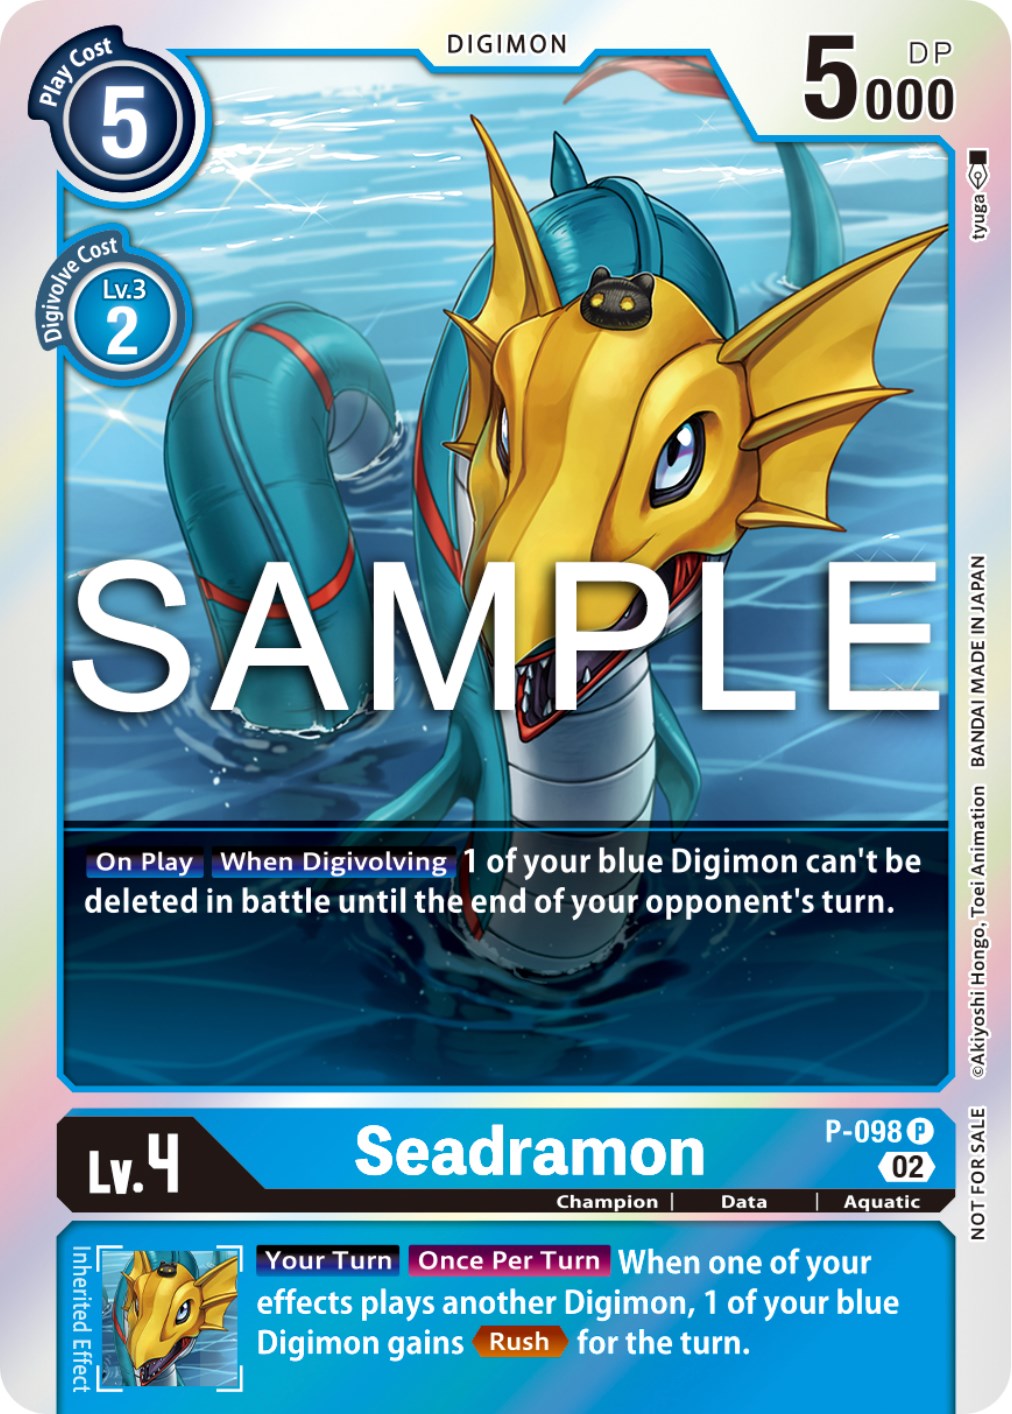 Seadramon [P-098] - P-098 (Limited Card Pack Ver.2) [Promotional Cards] | Shuffle n Cut Hobbies & Games